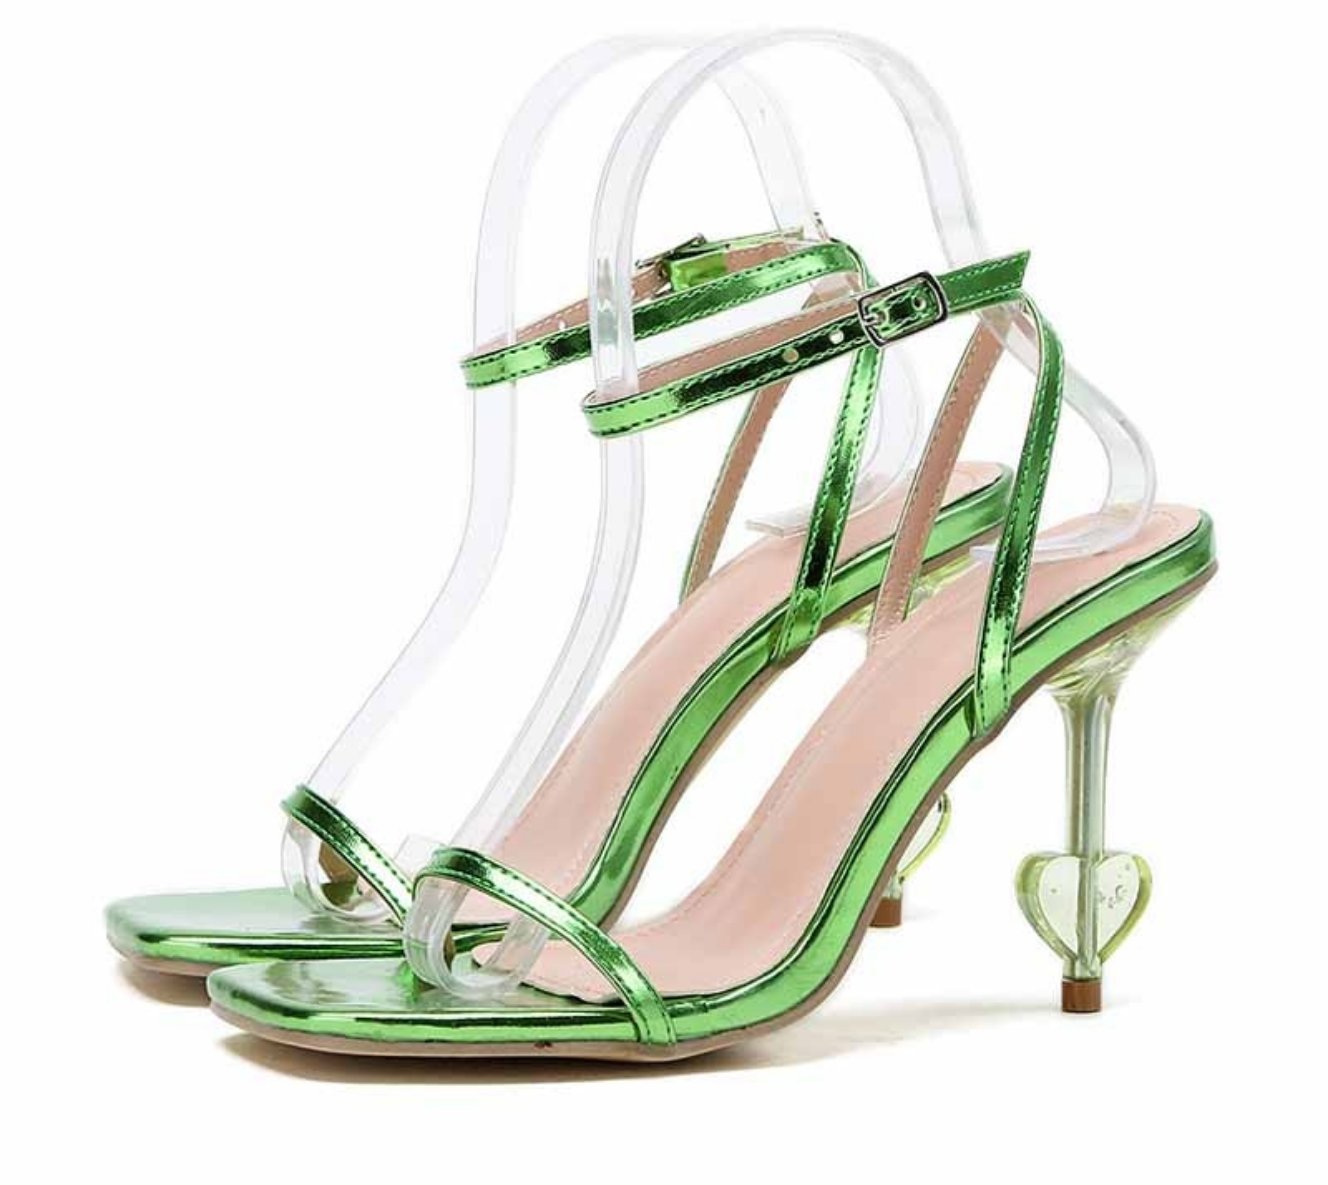 Shoes Women Strange Style Heart Shape Transparent High Heels Ladies Sandals Square Toe Fashion Ankle Buckle Strap Mujer